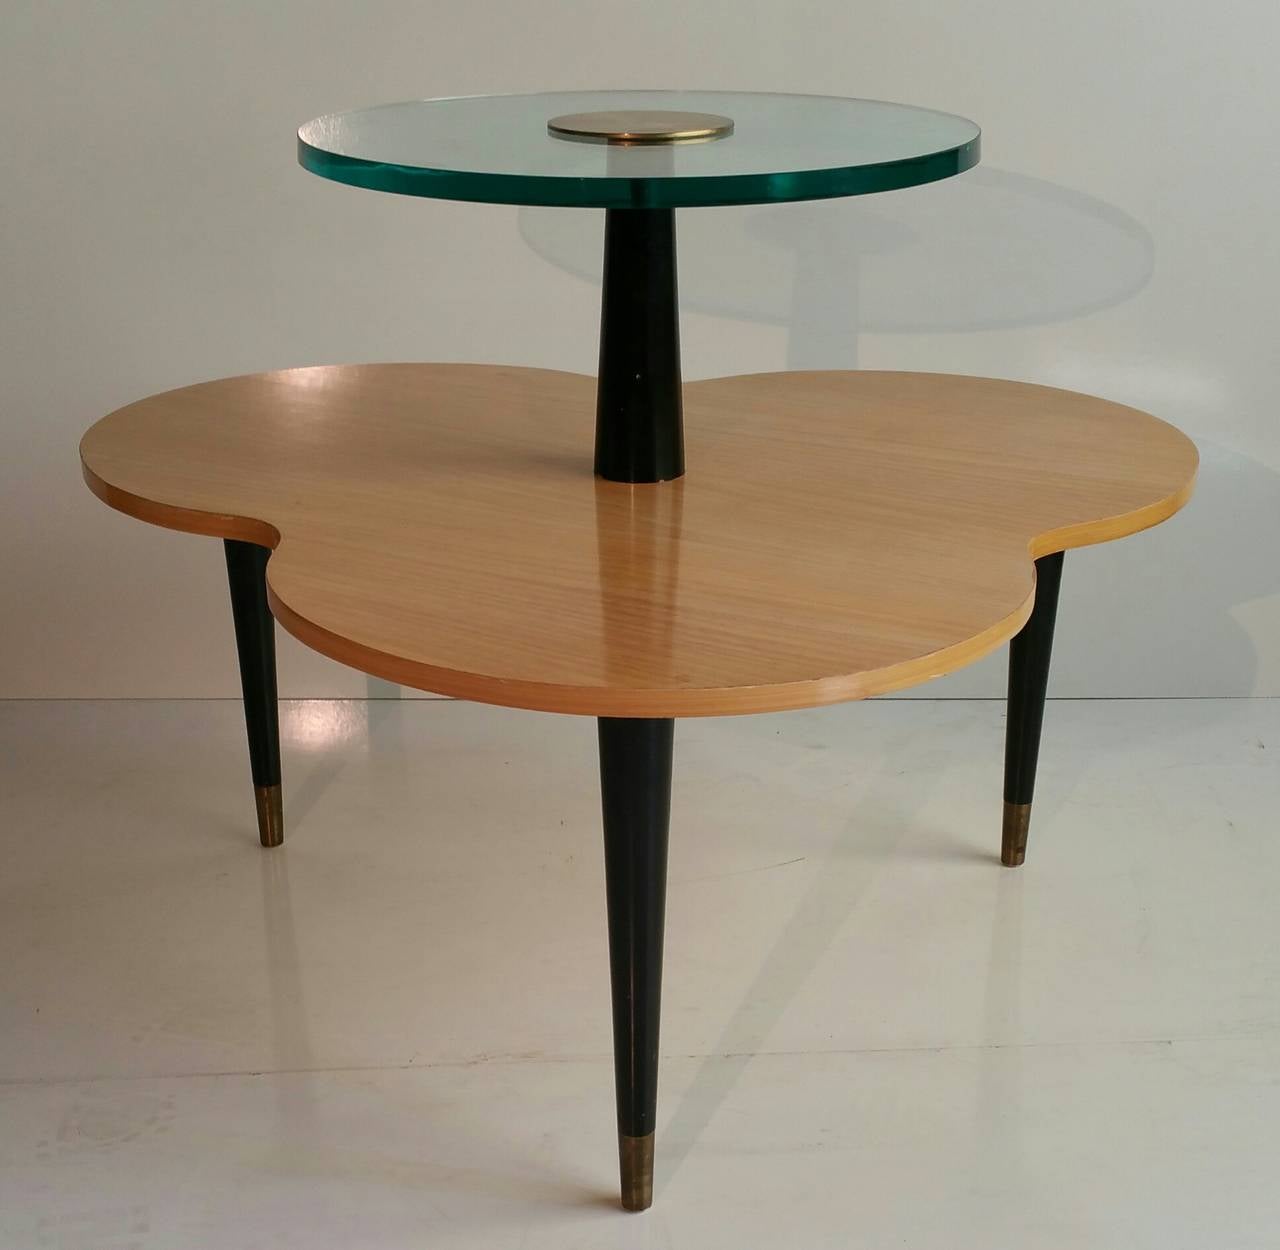 American Modern Wood and Glass Two-Tier Occasional Clover Table Designed by Gilbert Rohde